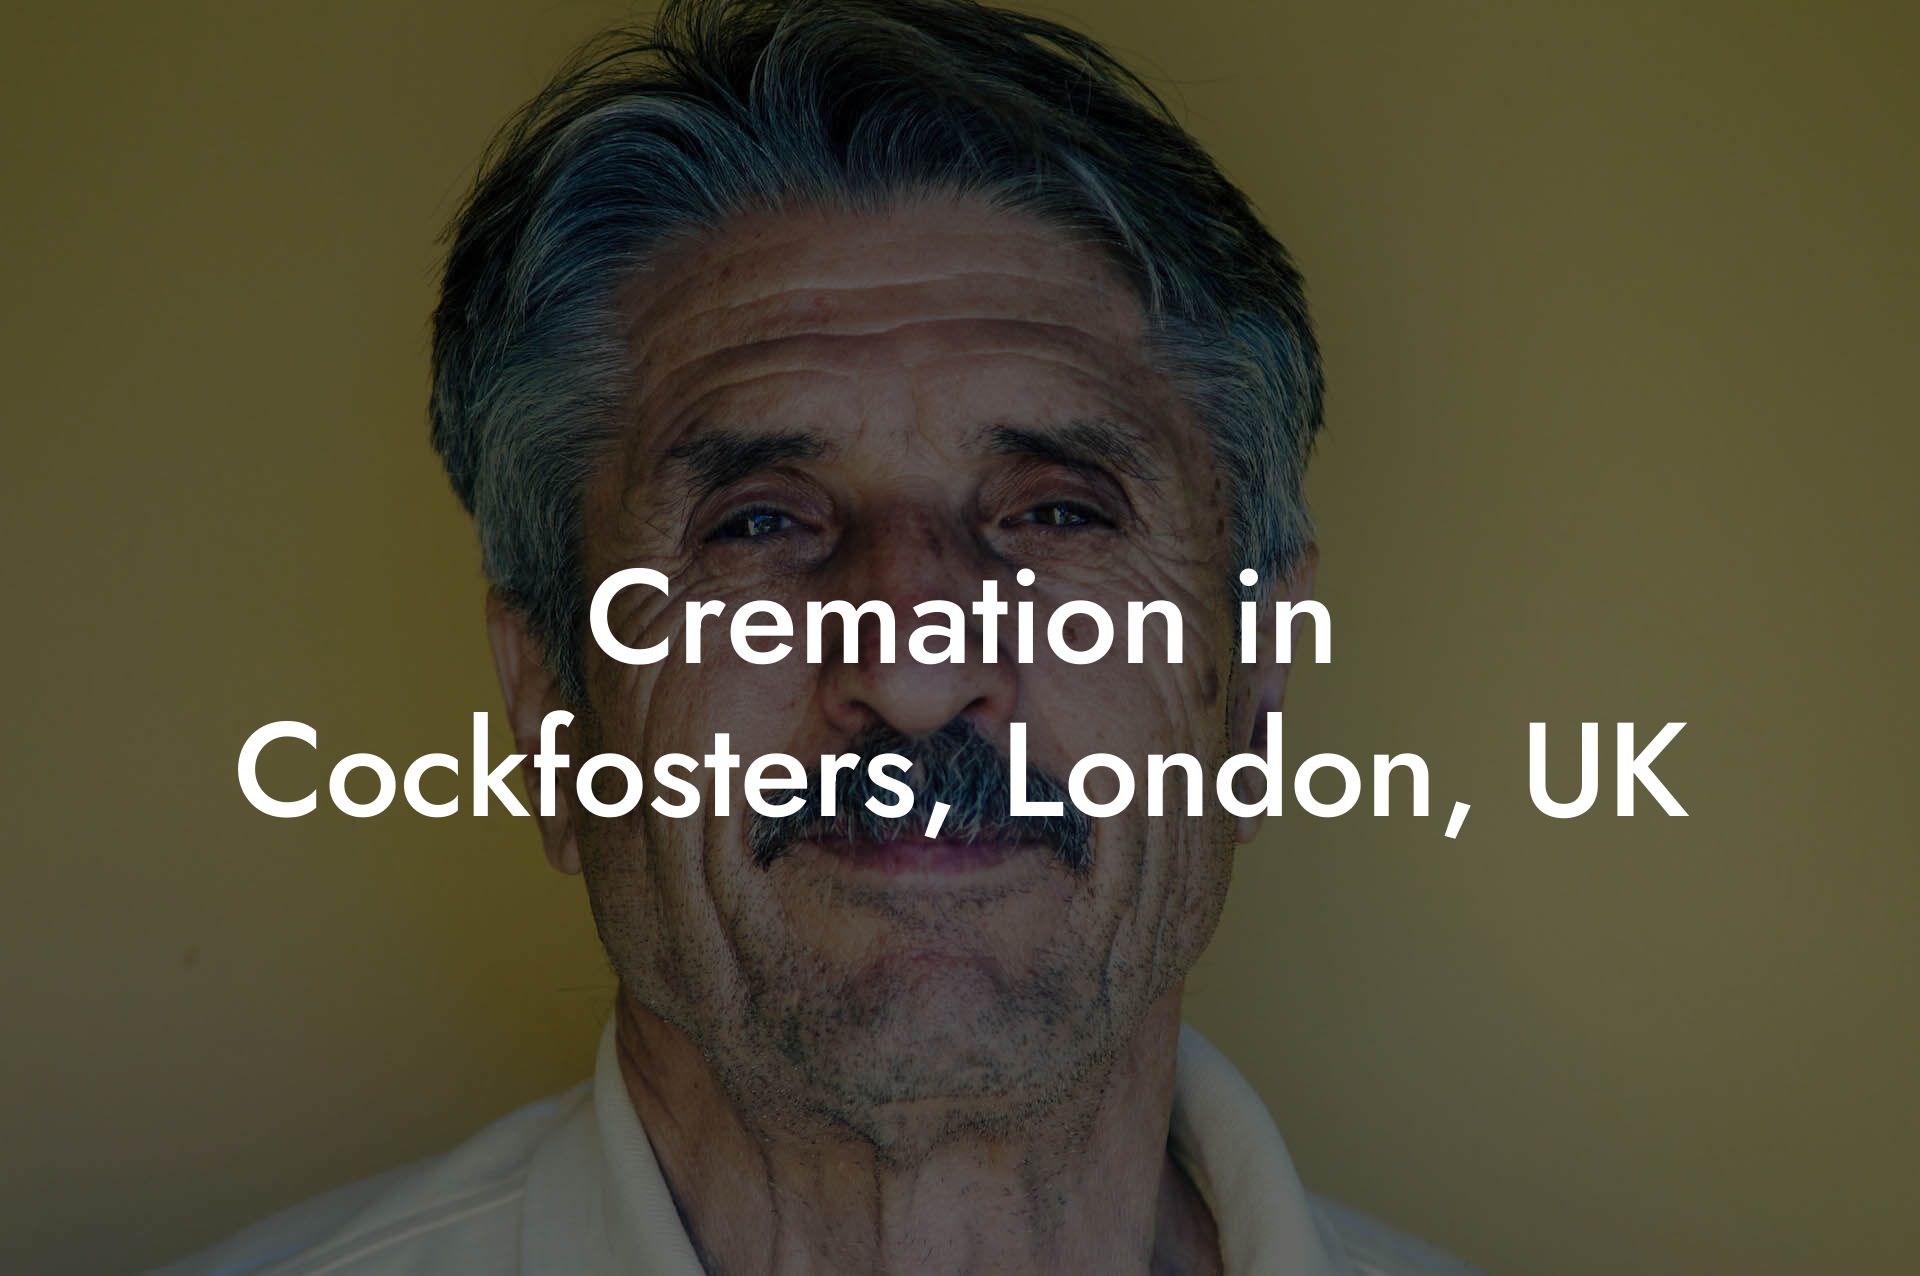 Cremation in Cockfosters, London, UK